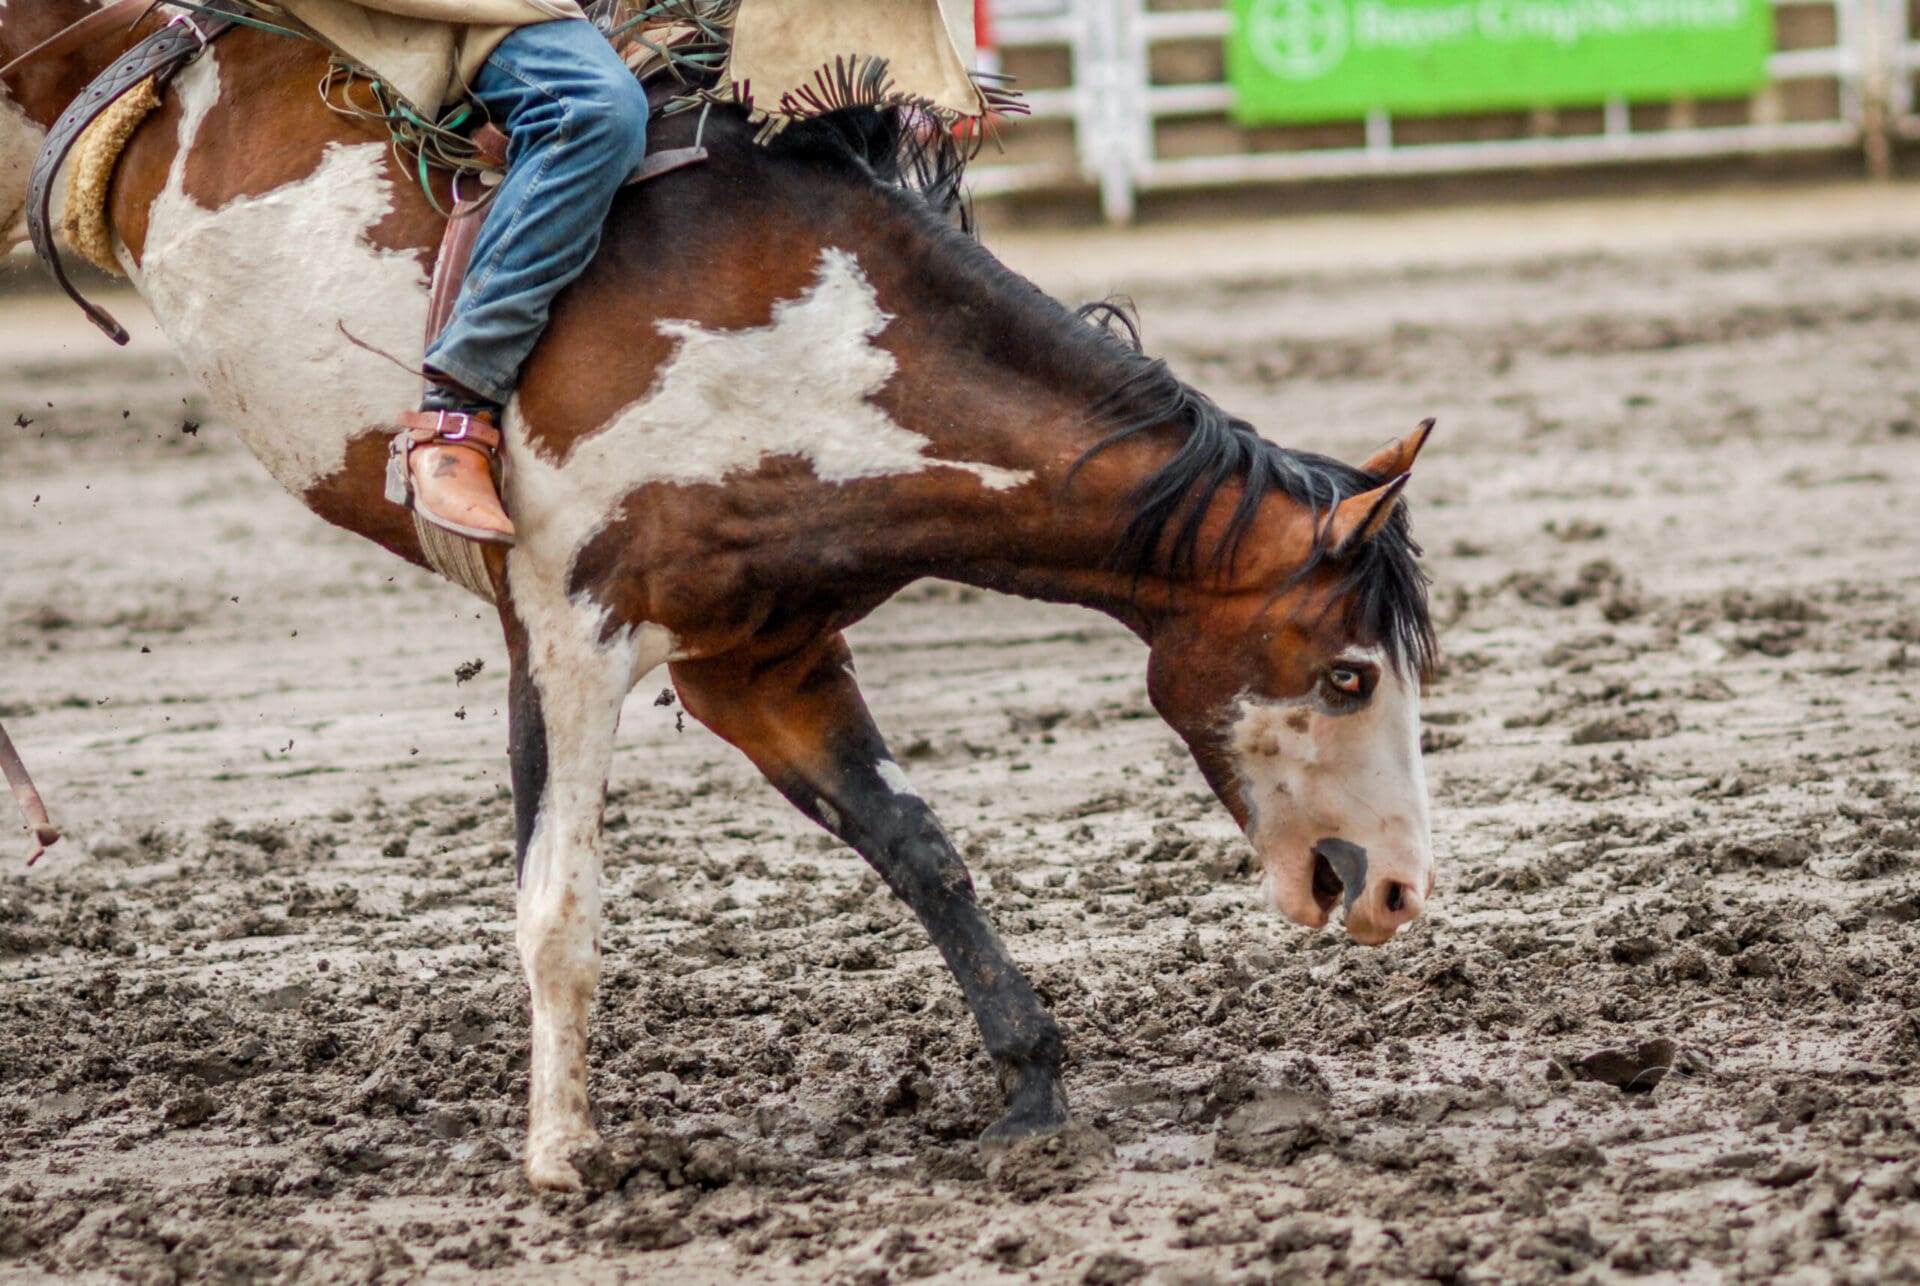 A bucking horse shows signs of stress during a saddle bronc event.